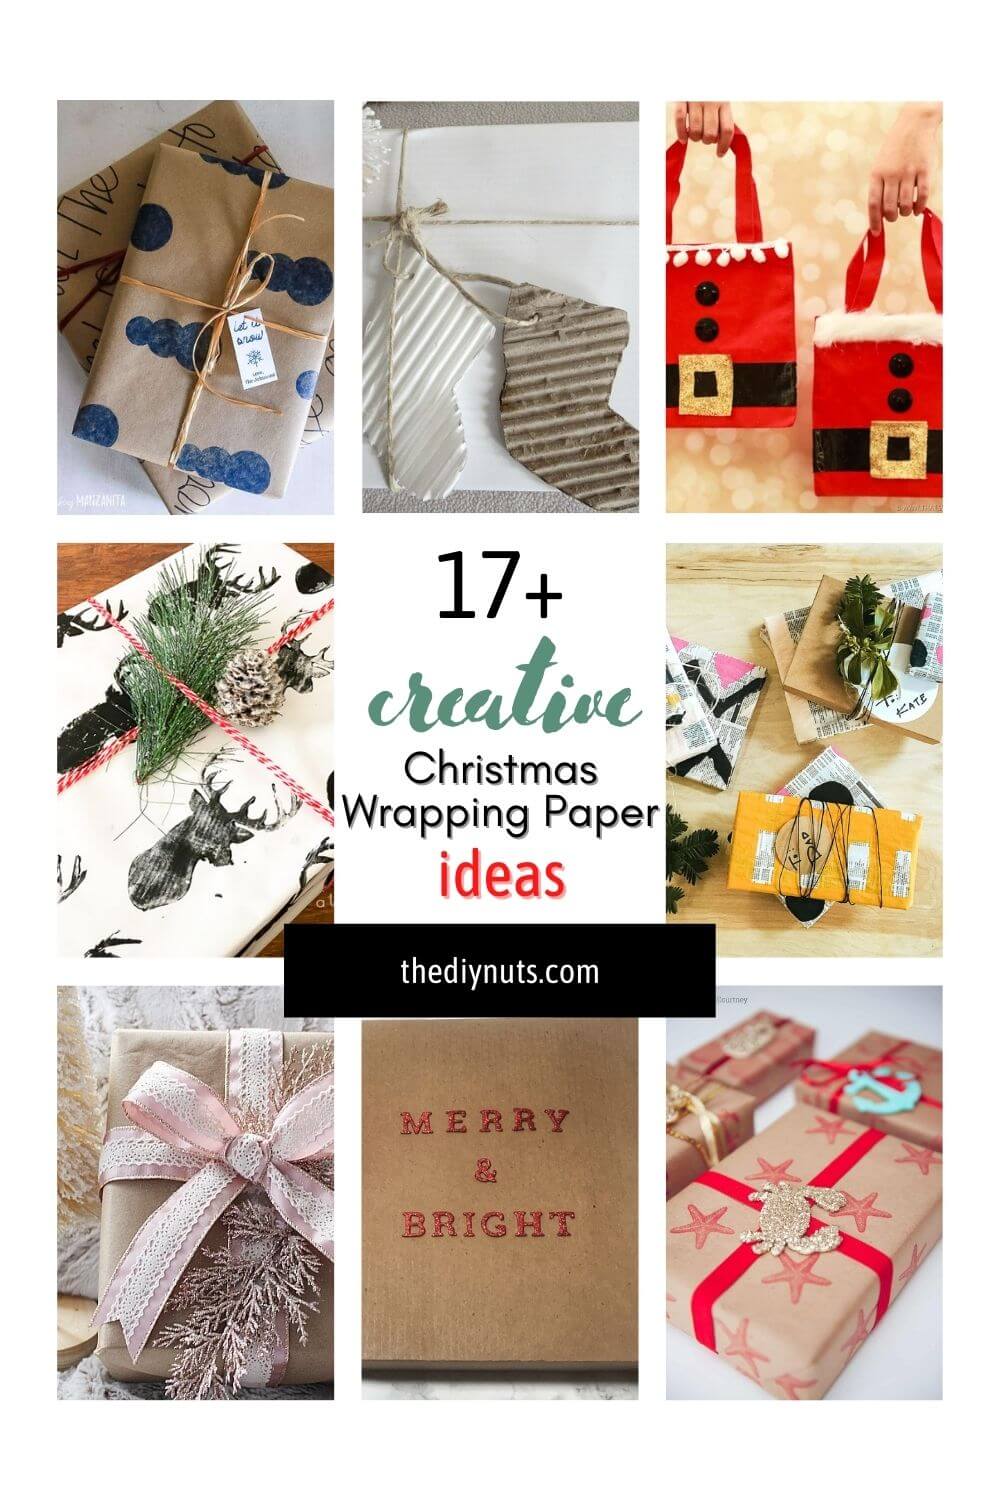 17+ creative Christmas wrapping paper ideas